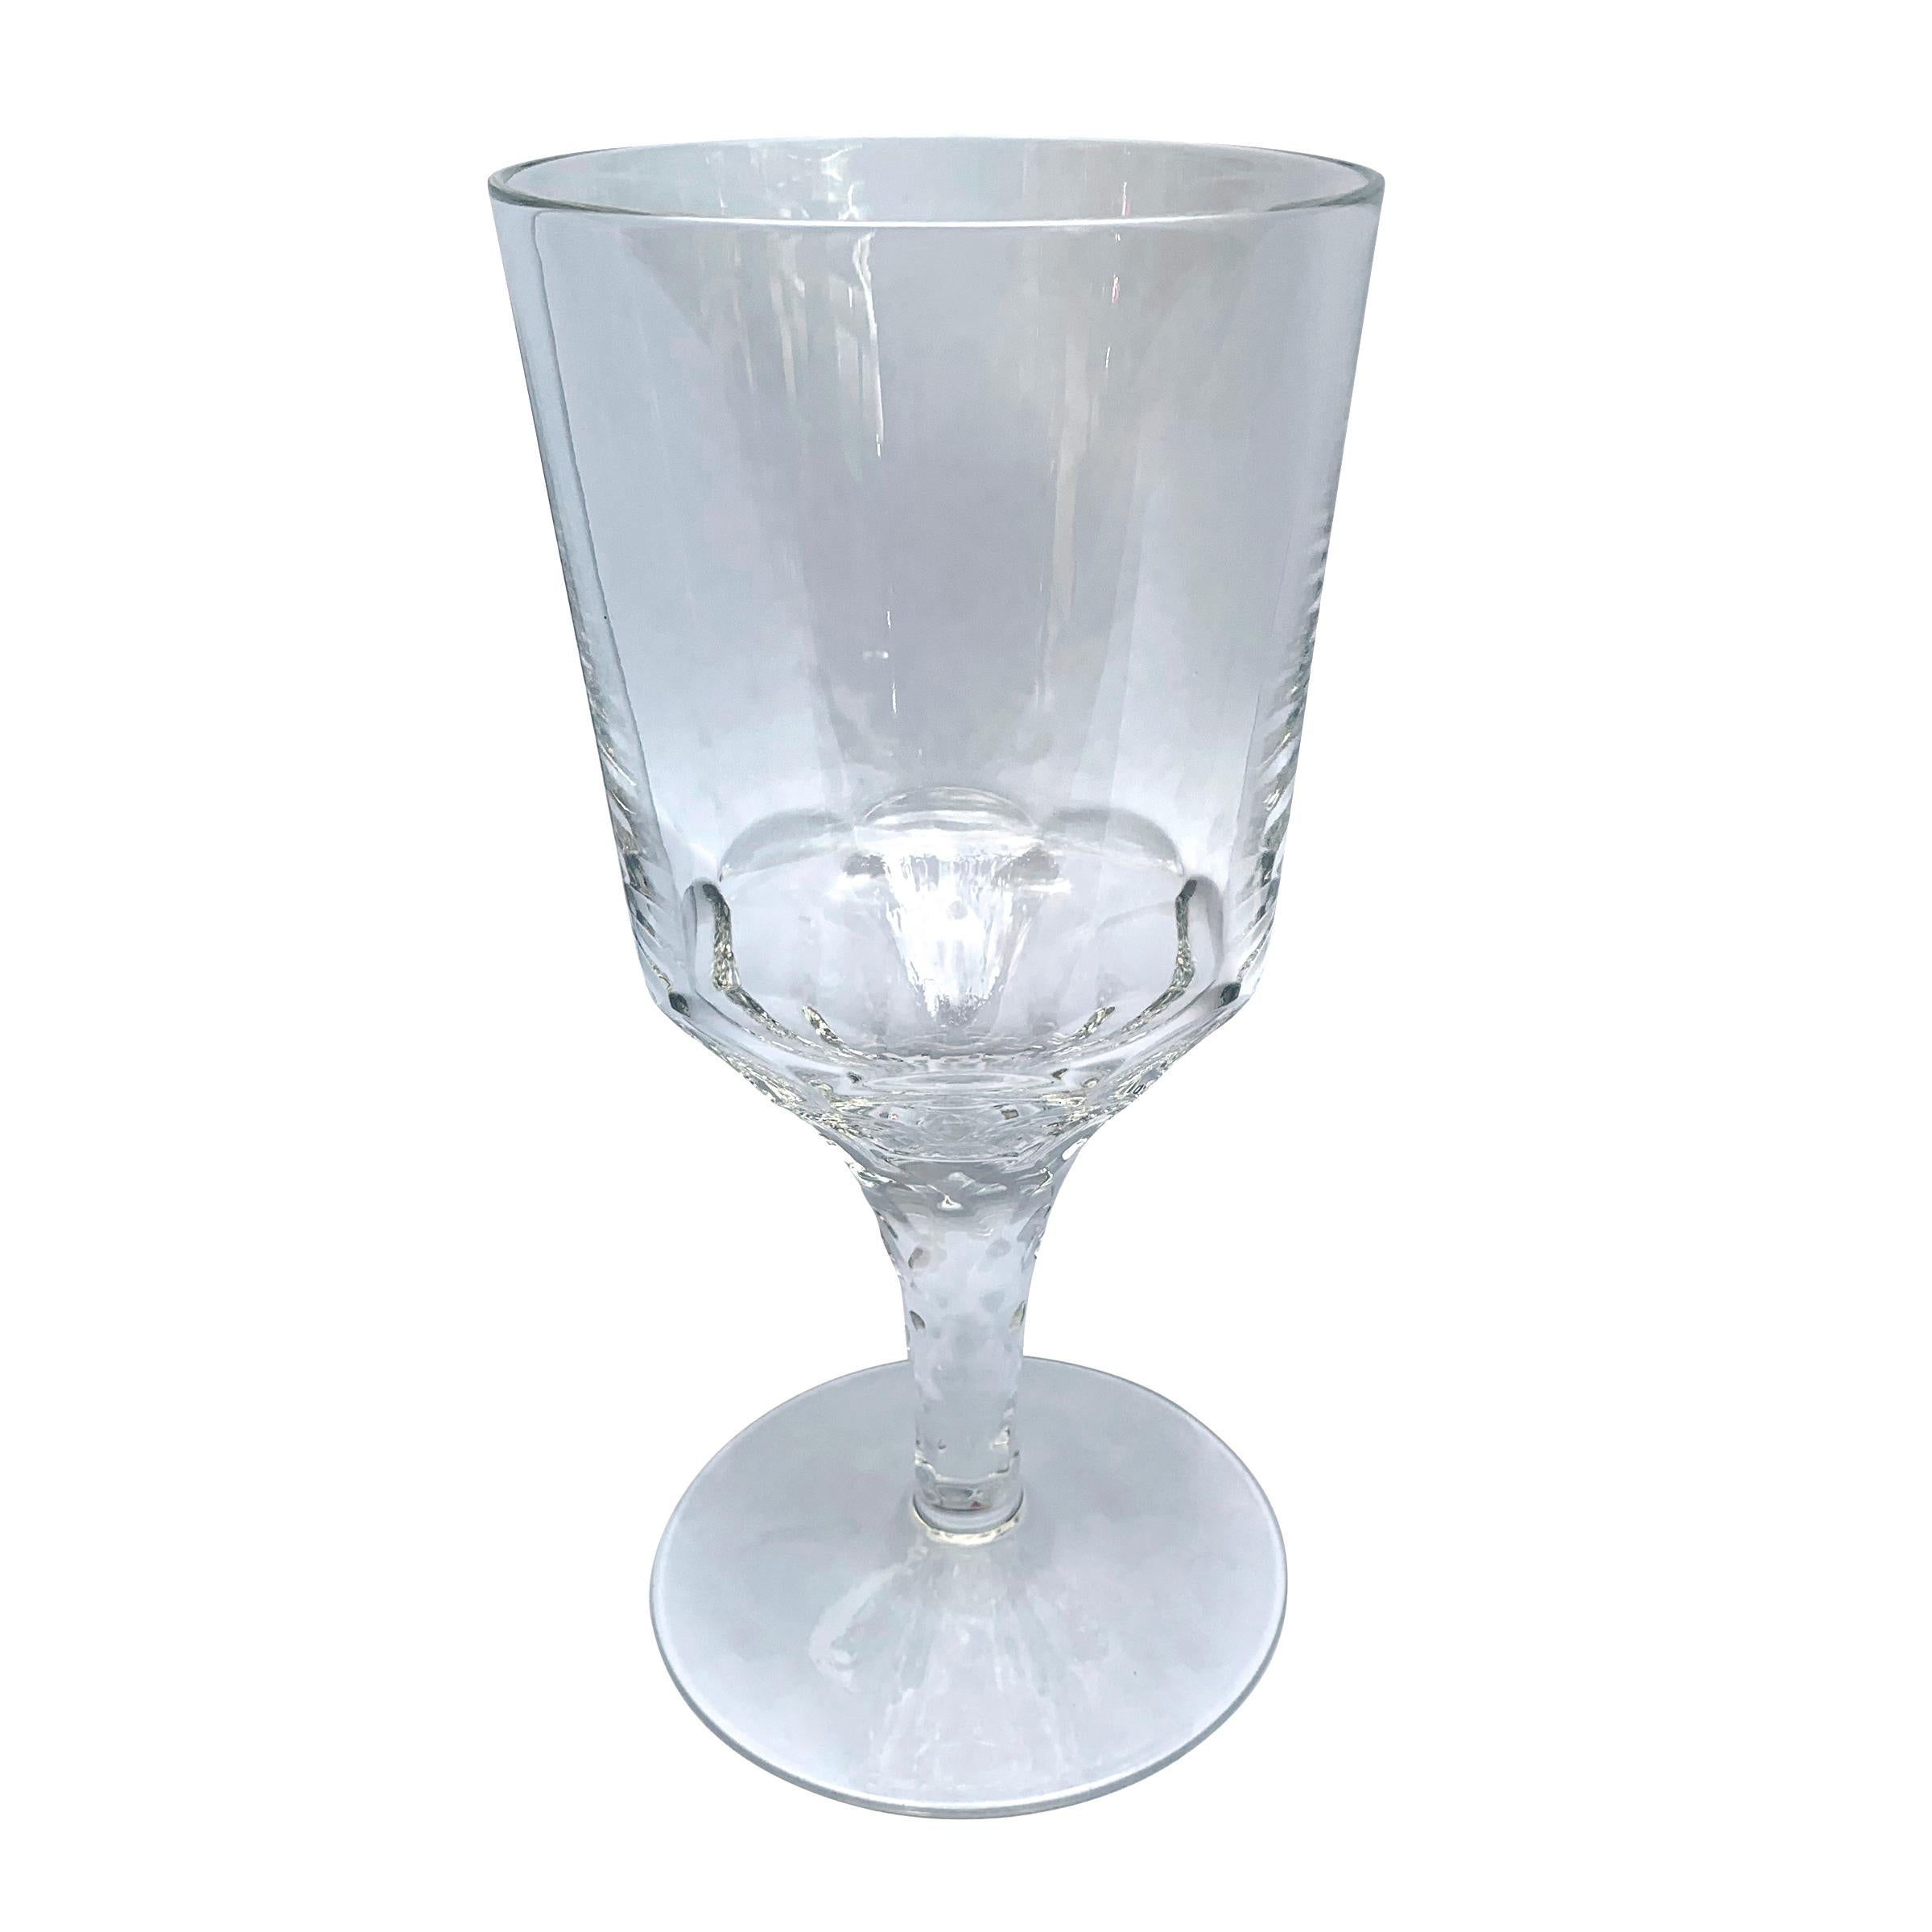 A fantastic set of eight heavy hand-blown crystal wine glasses, inspired by 18th century Georgian wine goblets, each with a facet-cut stem.